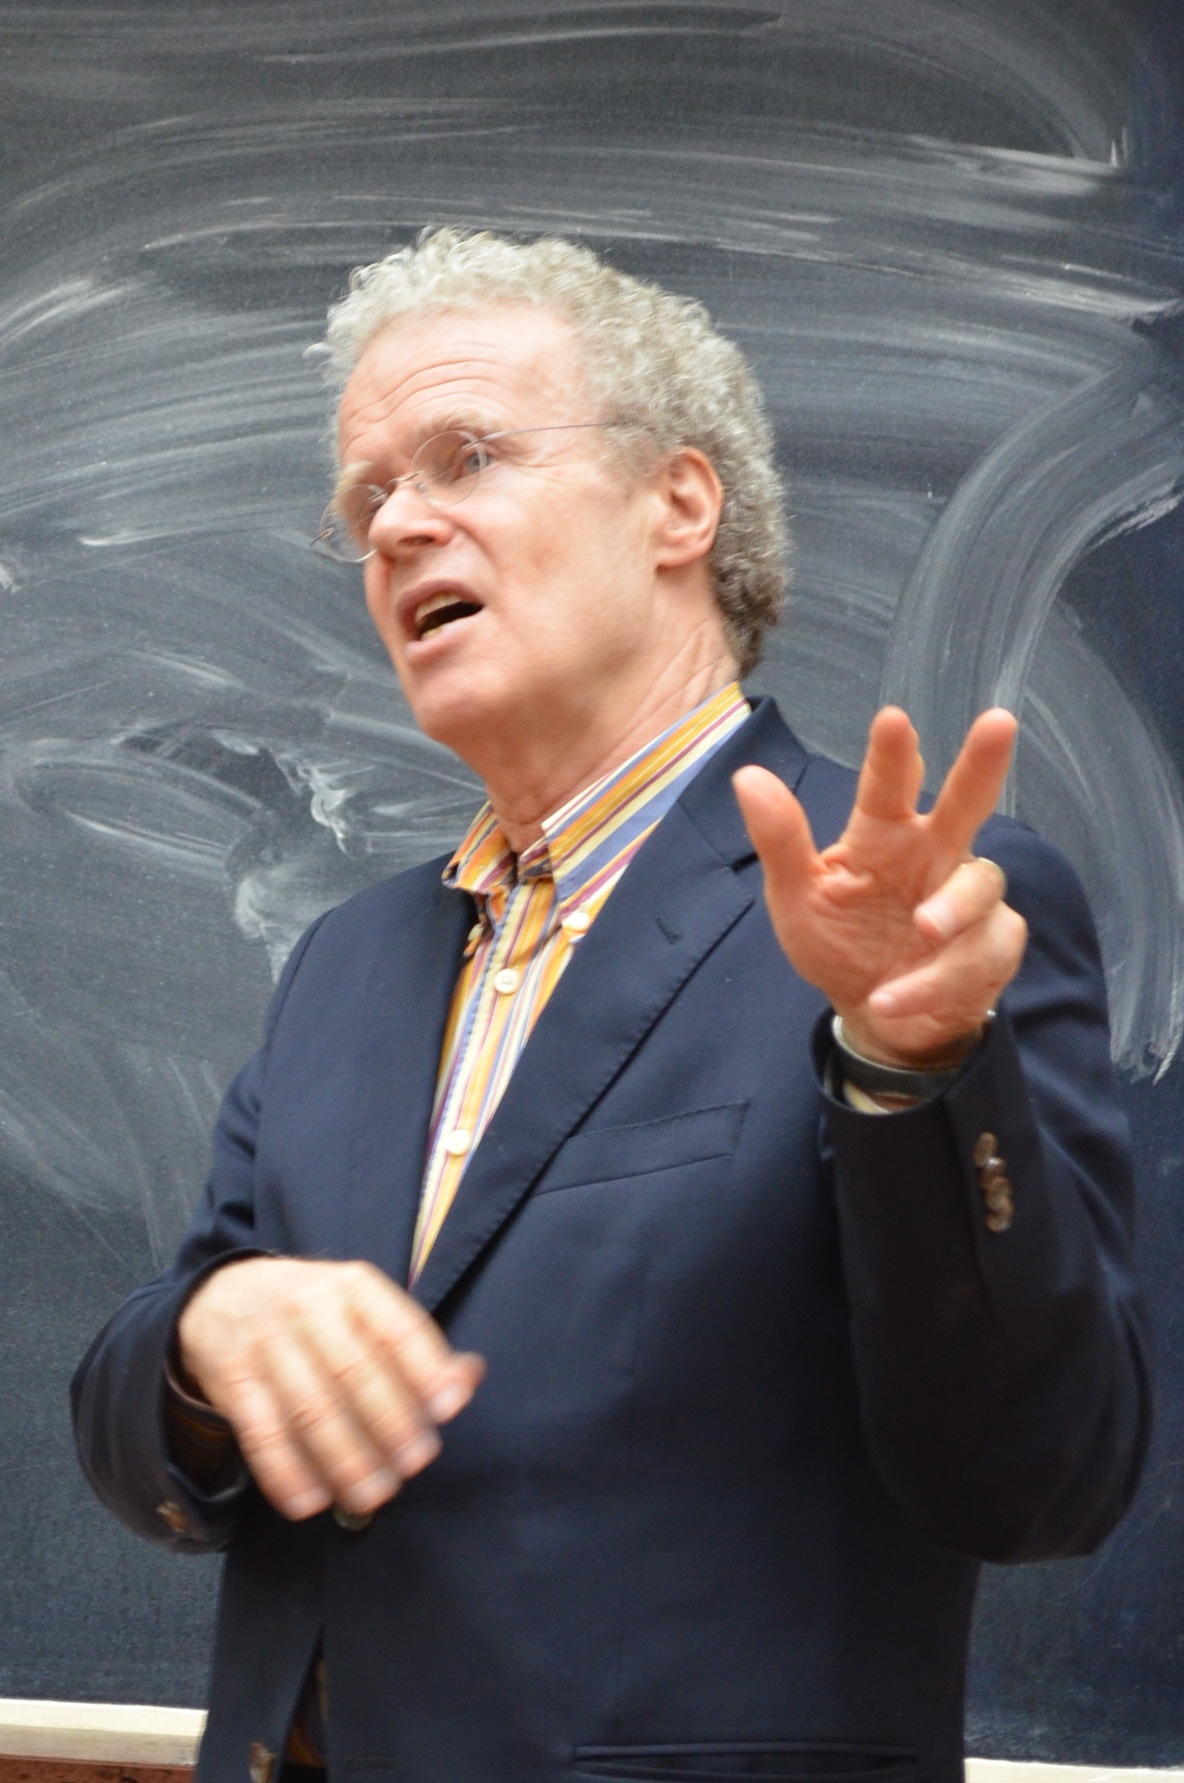 Erik Olin Wright, a sociologist, giving a lecture at faculty of sociology of Taras Shevchenko National University of Kyiv on March 13, 2013. Foto: Aliona Lyasheva. (CC BY-SA 3.0)